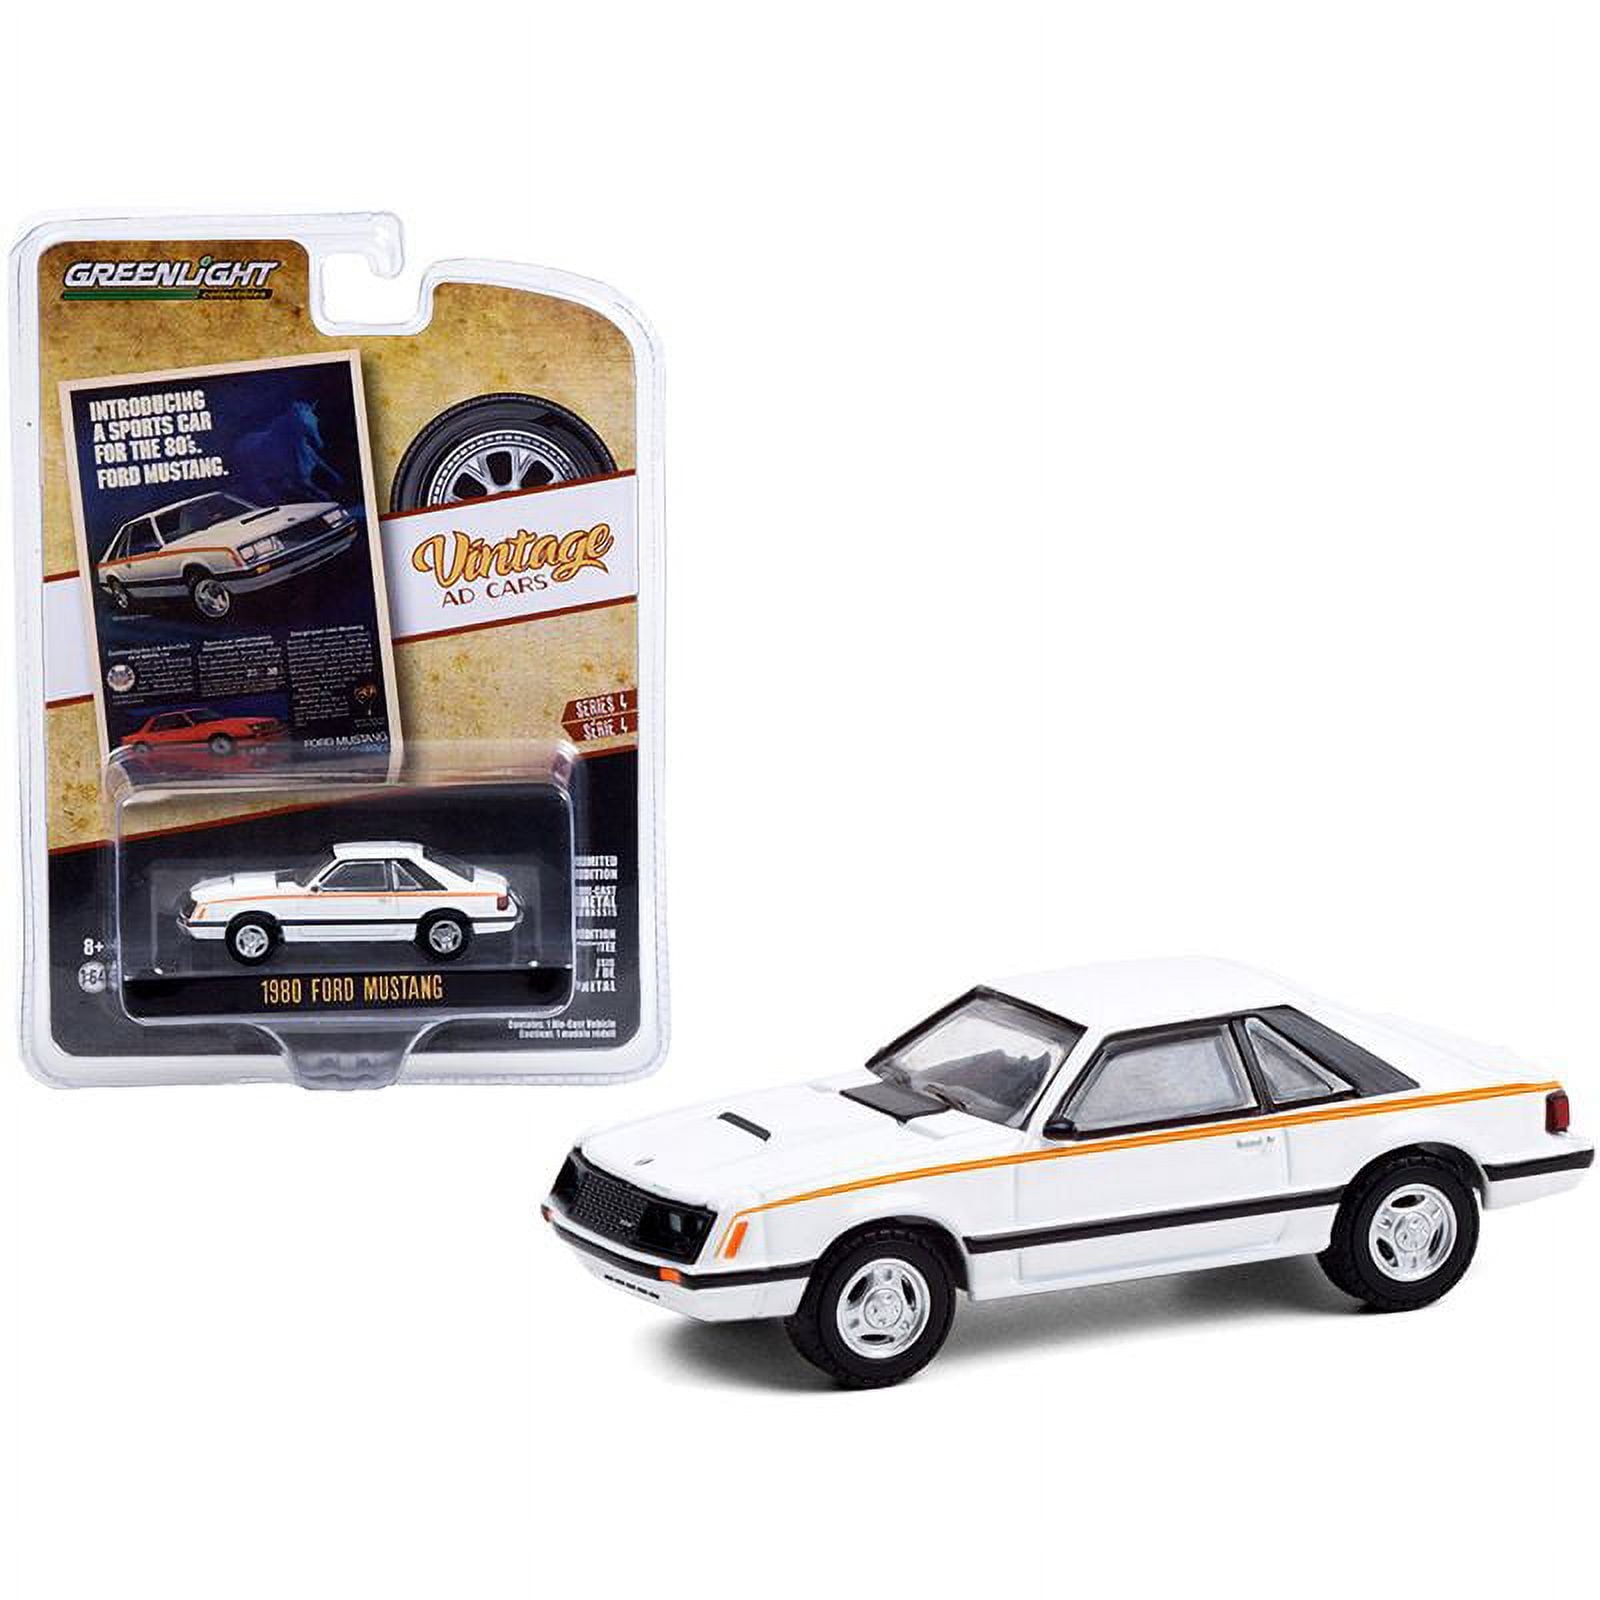 1/64 1984 FORD MUSTANG - VINTAGE AD CARS